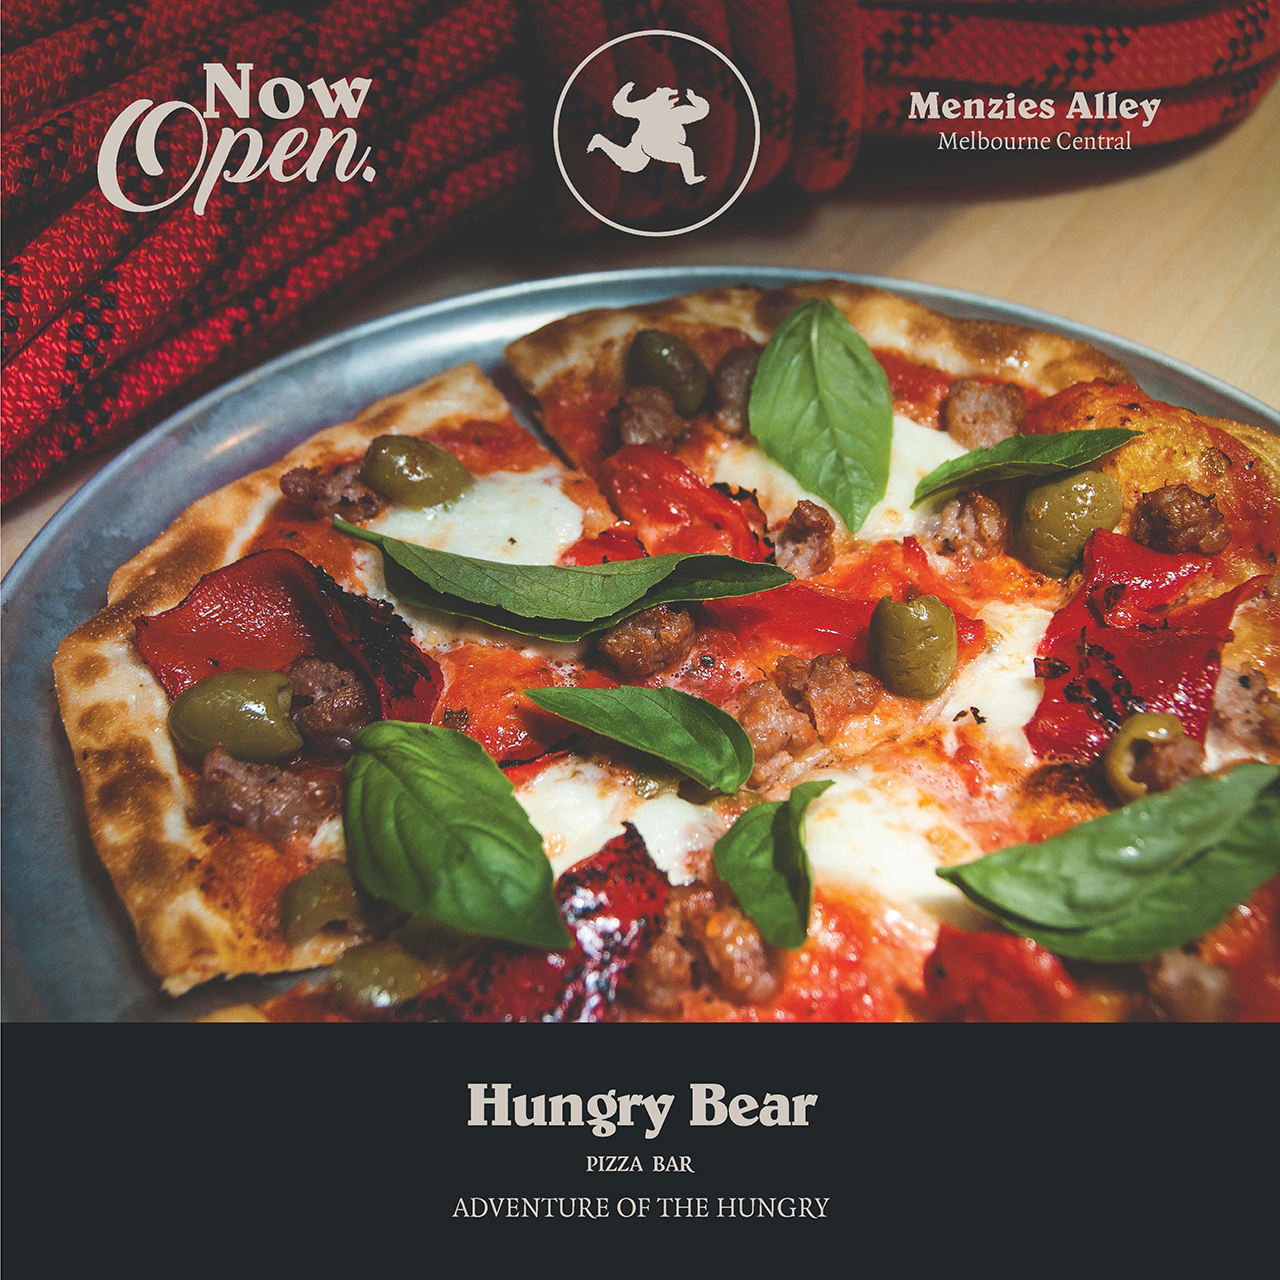 Hungry Bear is open